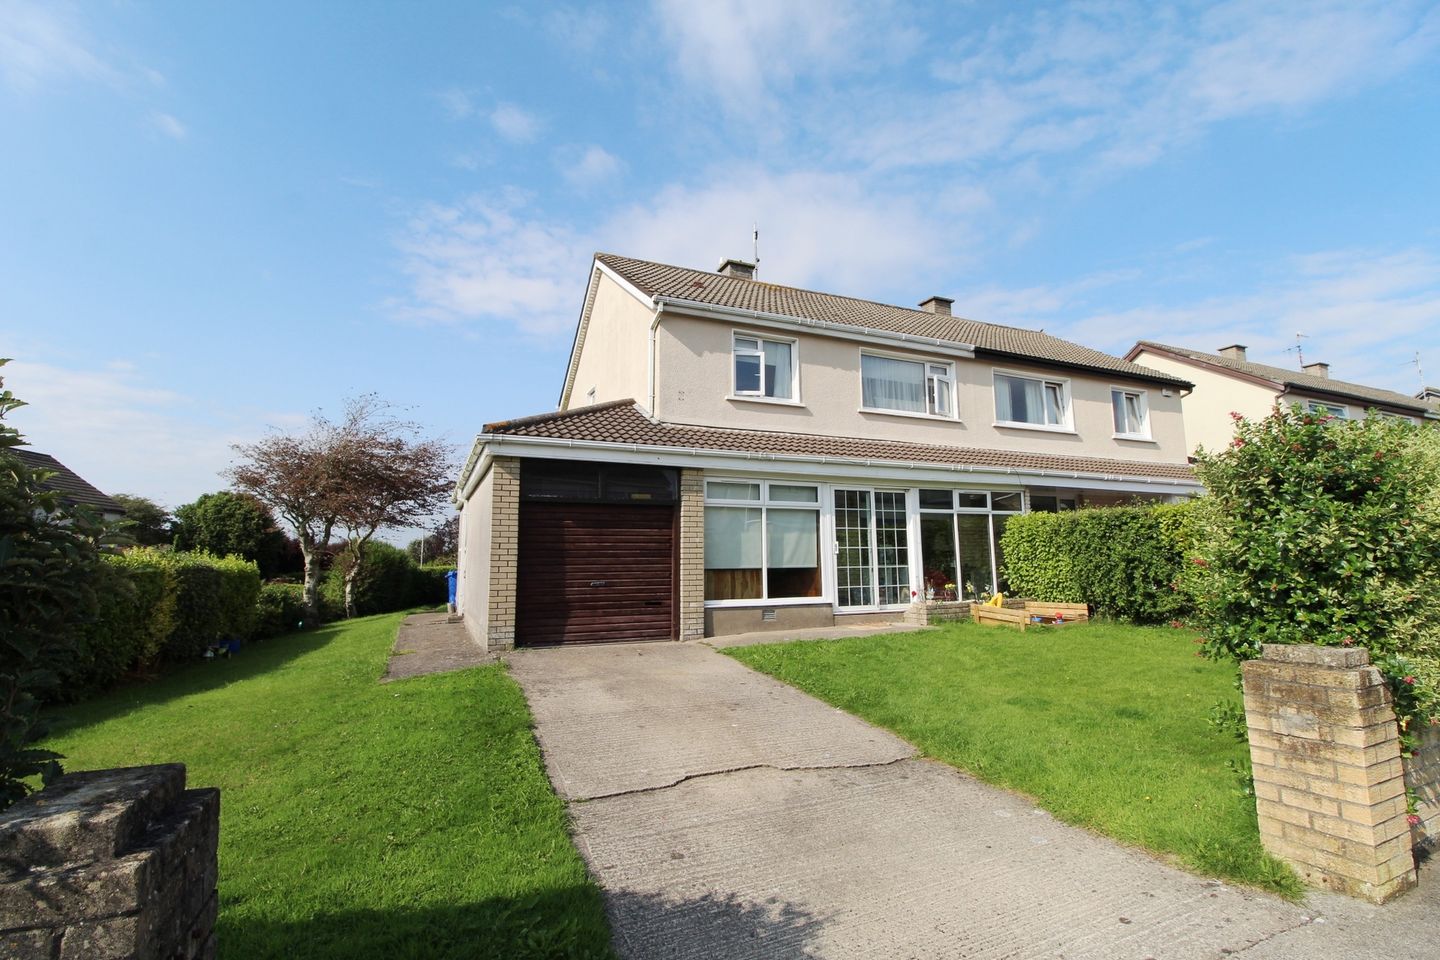 Byways, 80 Sweetbriar Lawn, Tramore, Co. Waterford